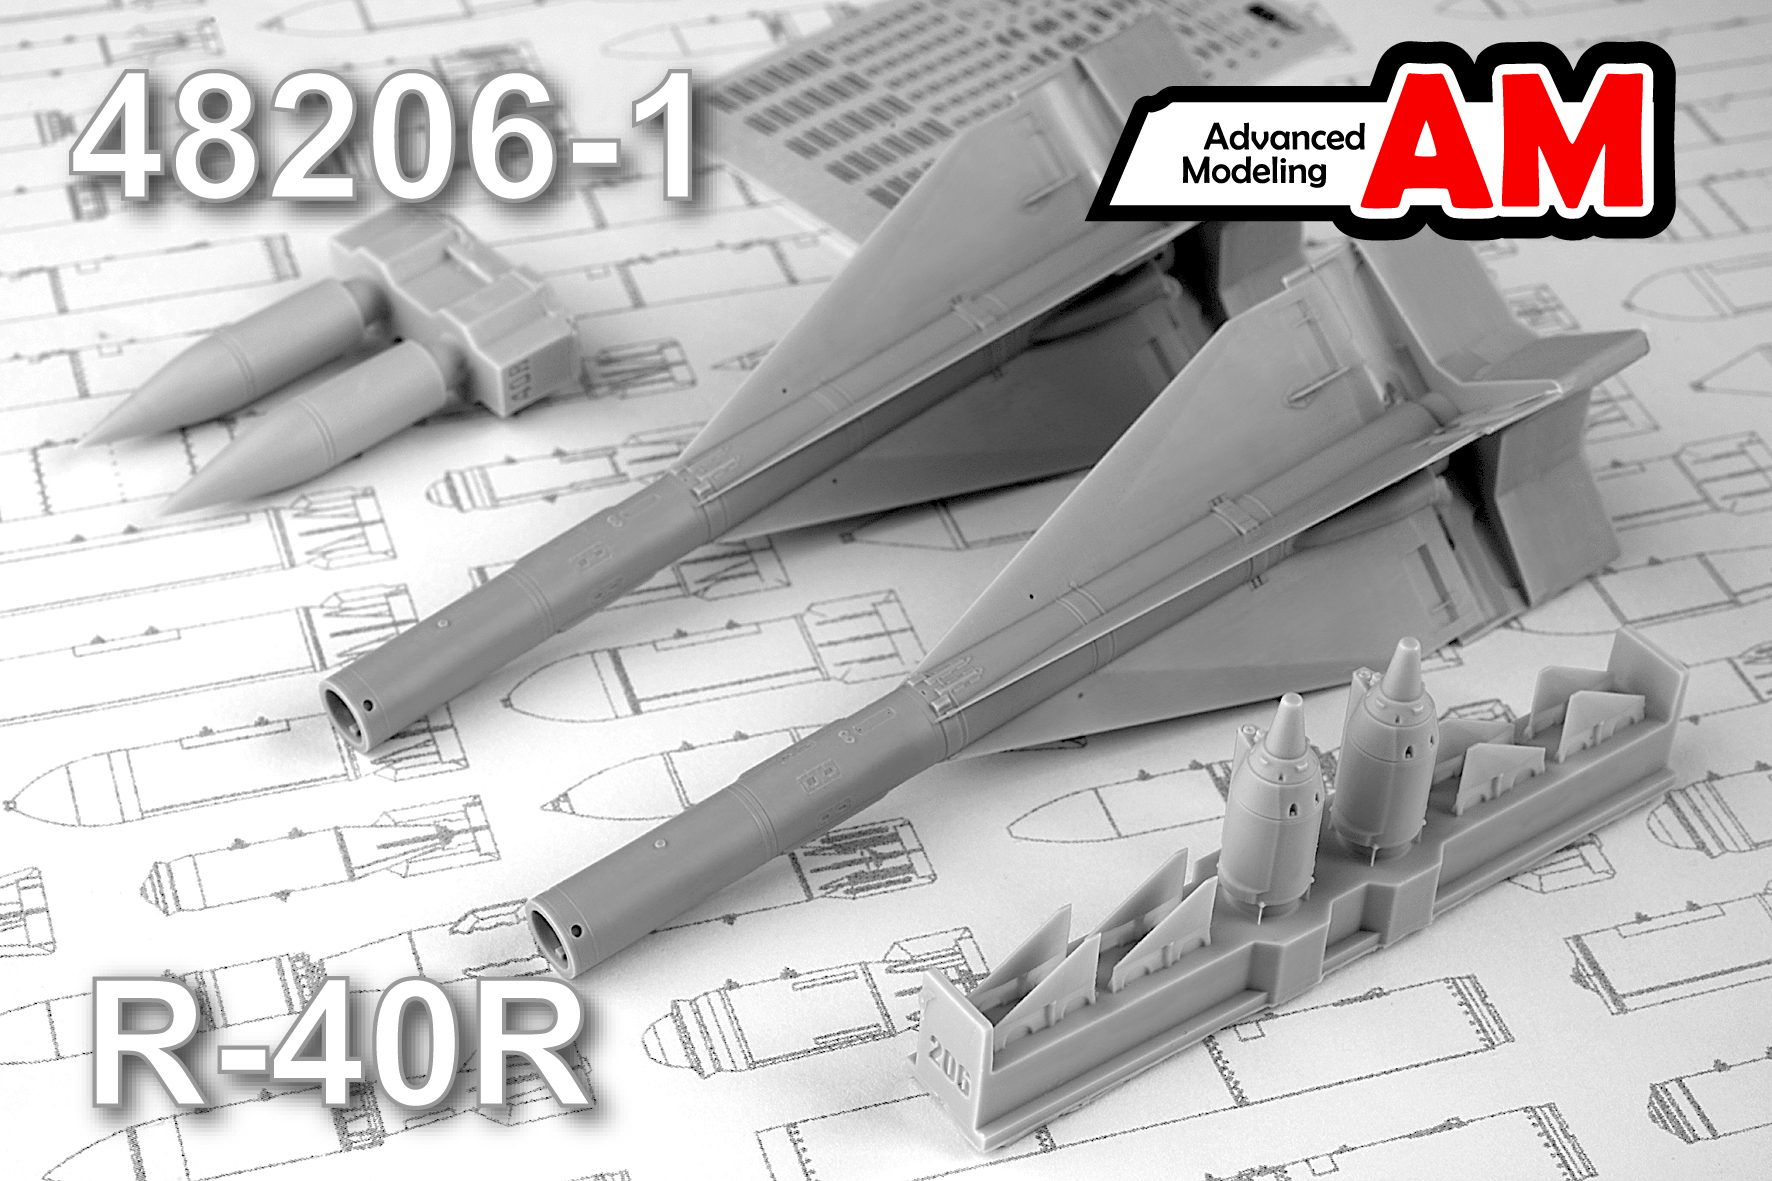 Additions (3D resin printing) 1/48 R-40R Air to Air missile (Advanced Modeling) 